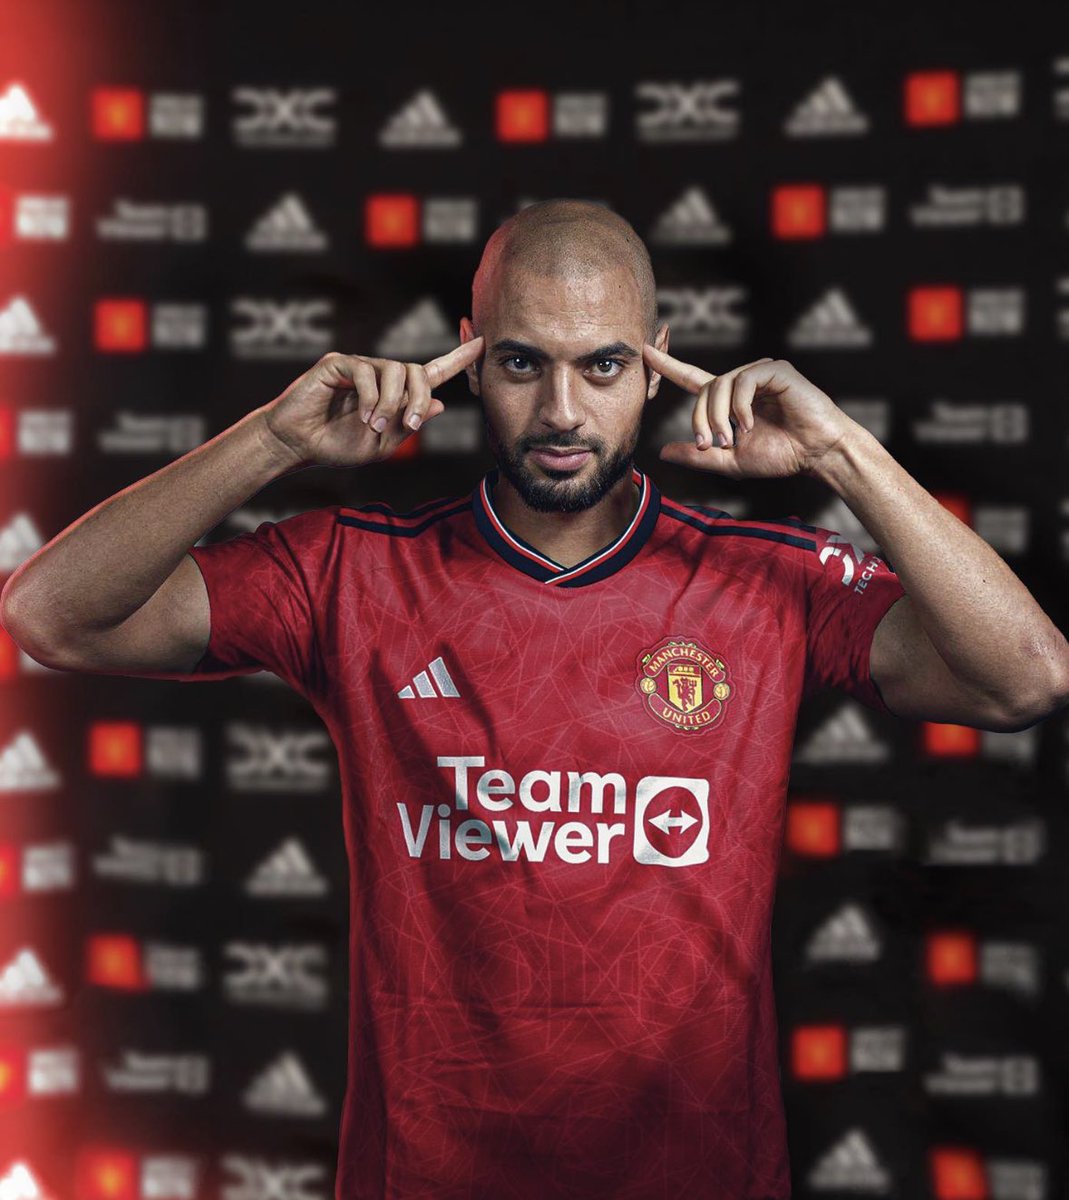 Official, confirmed. Sofyan Amrabat joins Manchester United 🔴🇲🇦 “I’m someone who always listens to my heart and now I am representing the club of my dreams”. ❤️✨